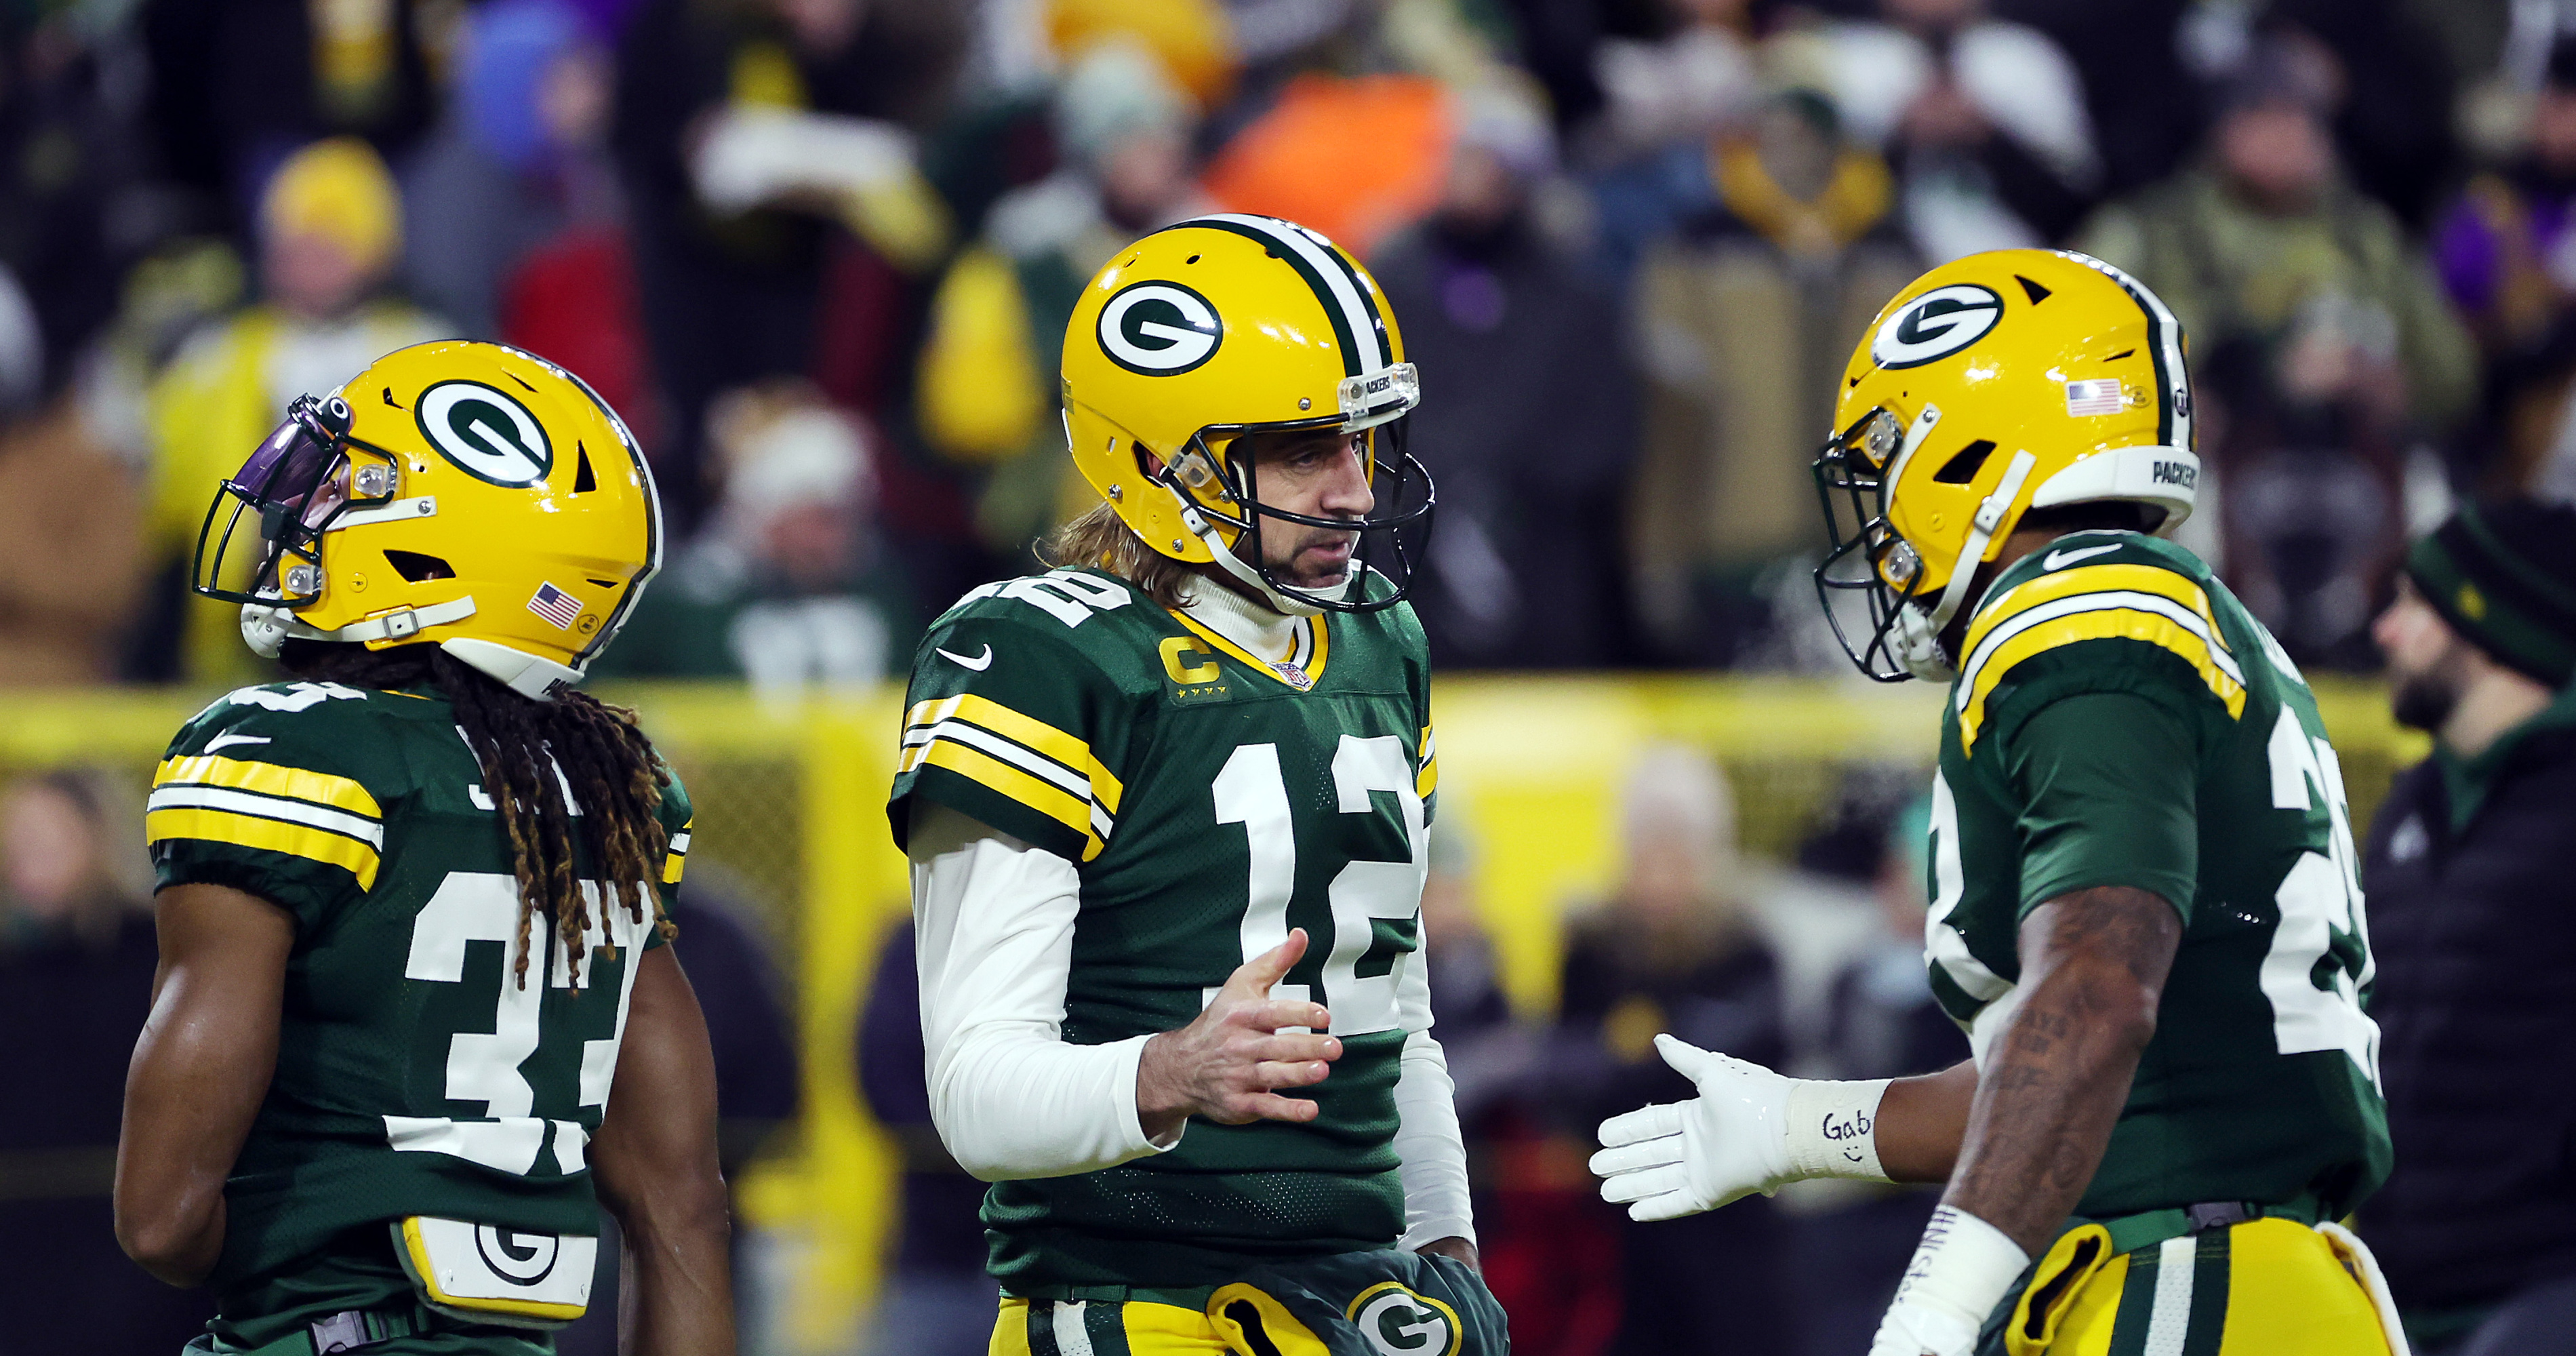 The Green Bay Packers Can Clinch The NFC's No. 1 Seed With A Win Tonight